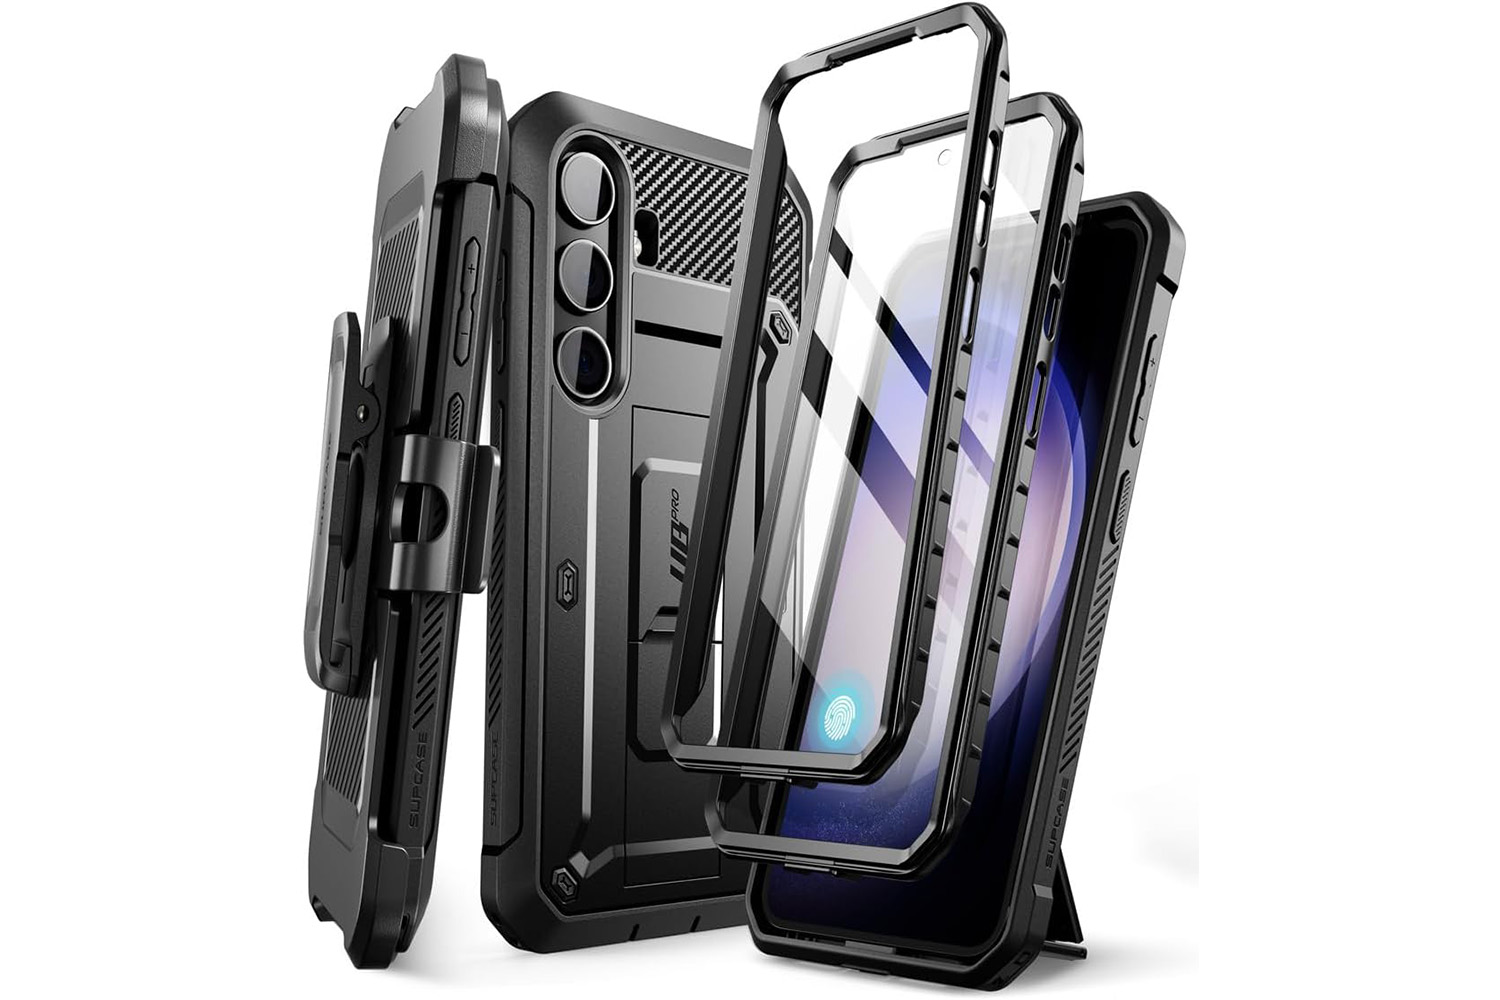  S24 Plus Flip Case for Samsung Galaxy S24 Plus 5G Case, Clear  View Slim Fit Leather Cover for Samsung S24 Plus Phone Case with Kickstand  Rugged Heavy Duty Shockproof Bumper Shell